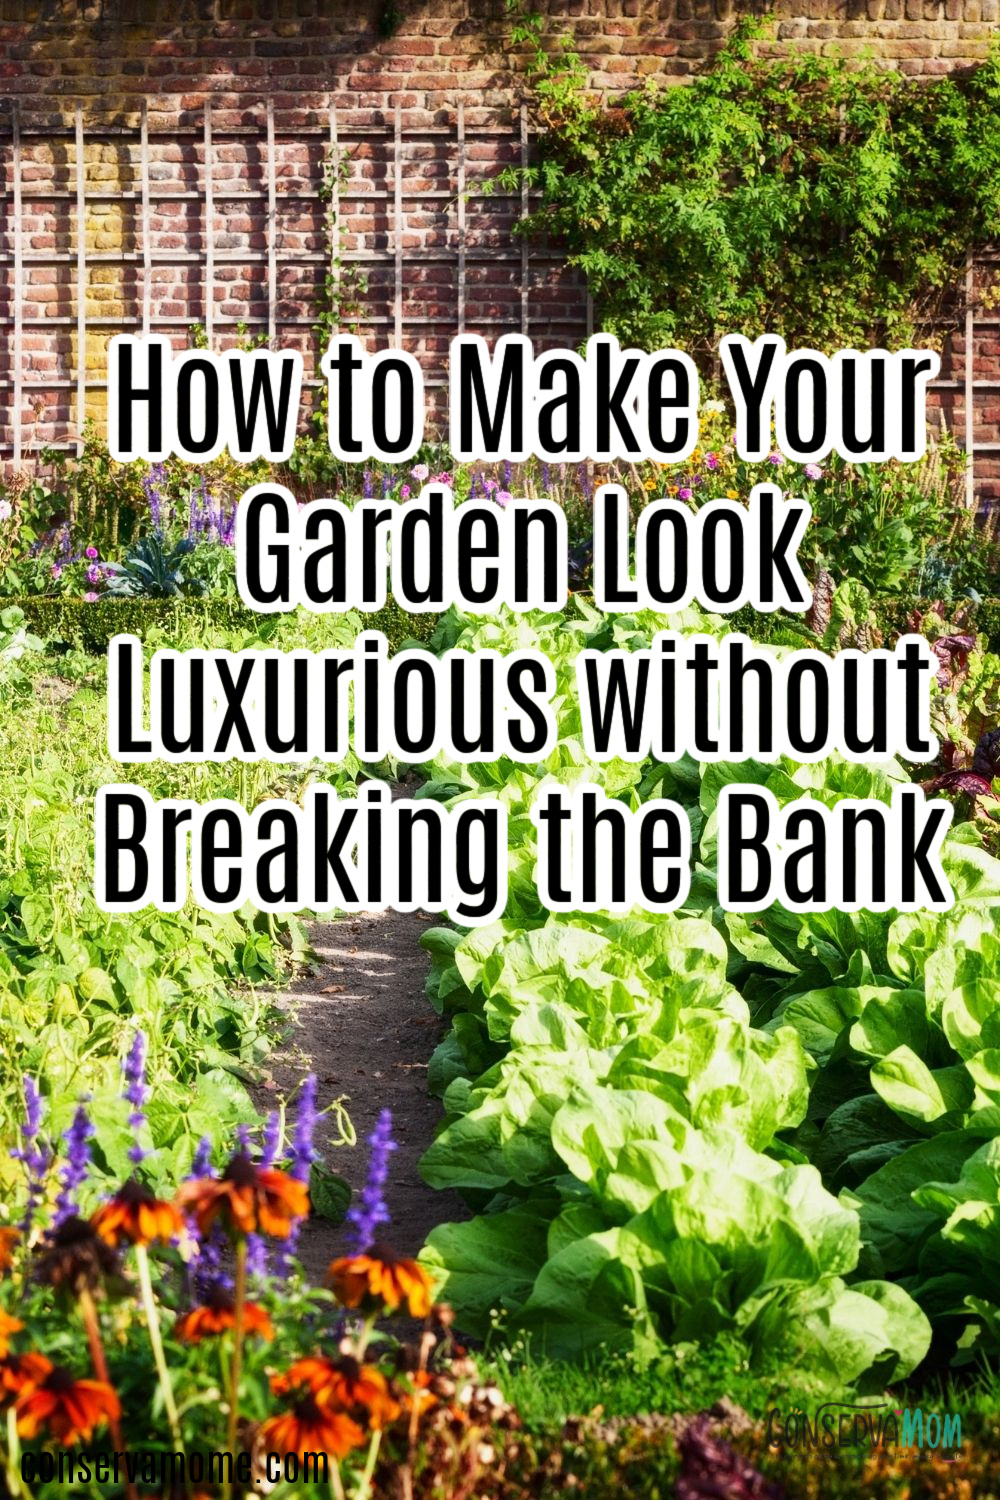 Make Your Garden gorgeous without Breaking the Bank